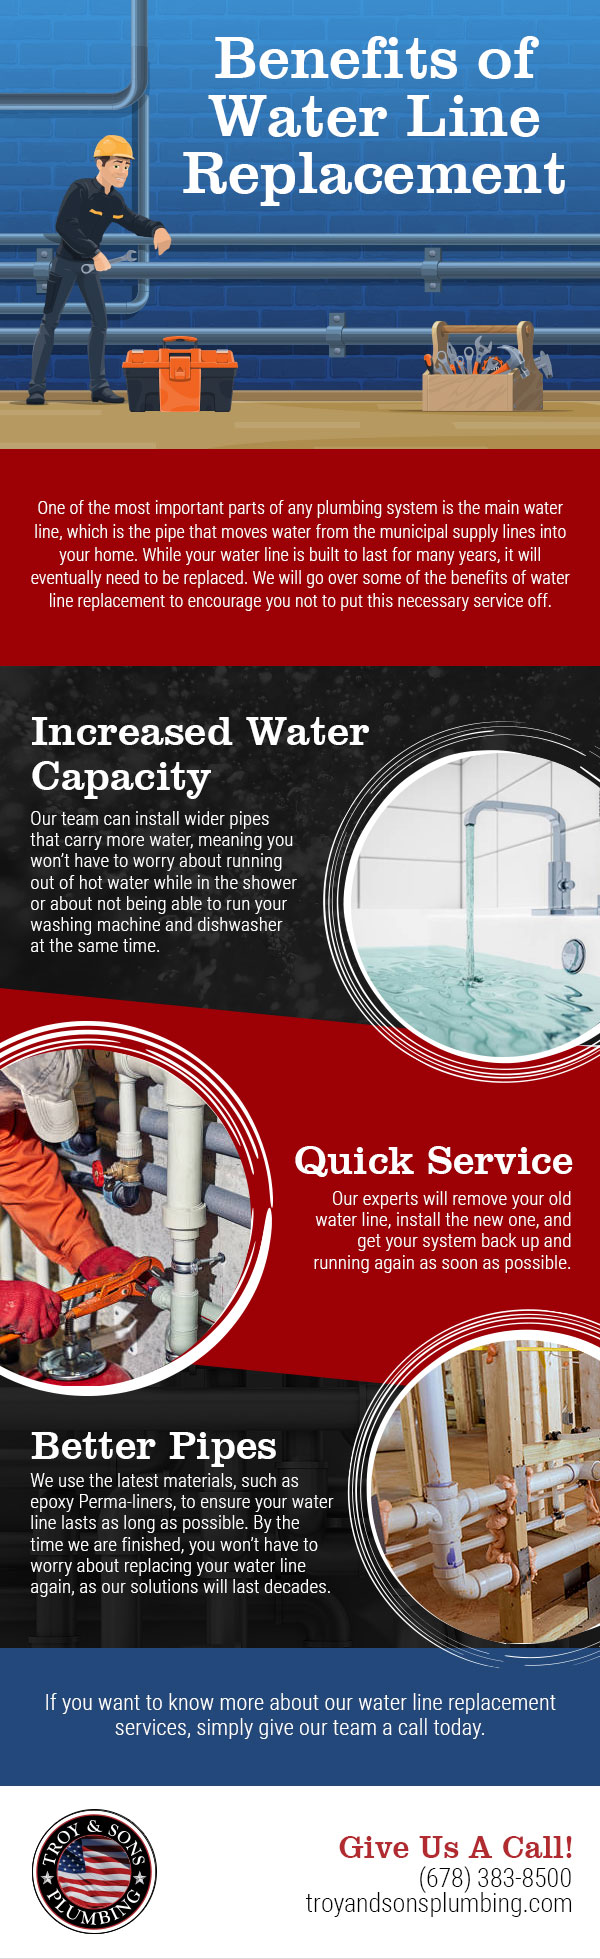 Benefits of Water Line Replacement